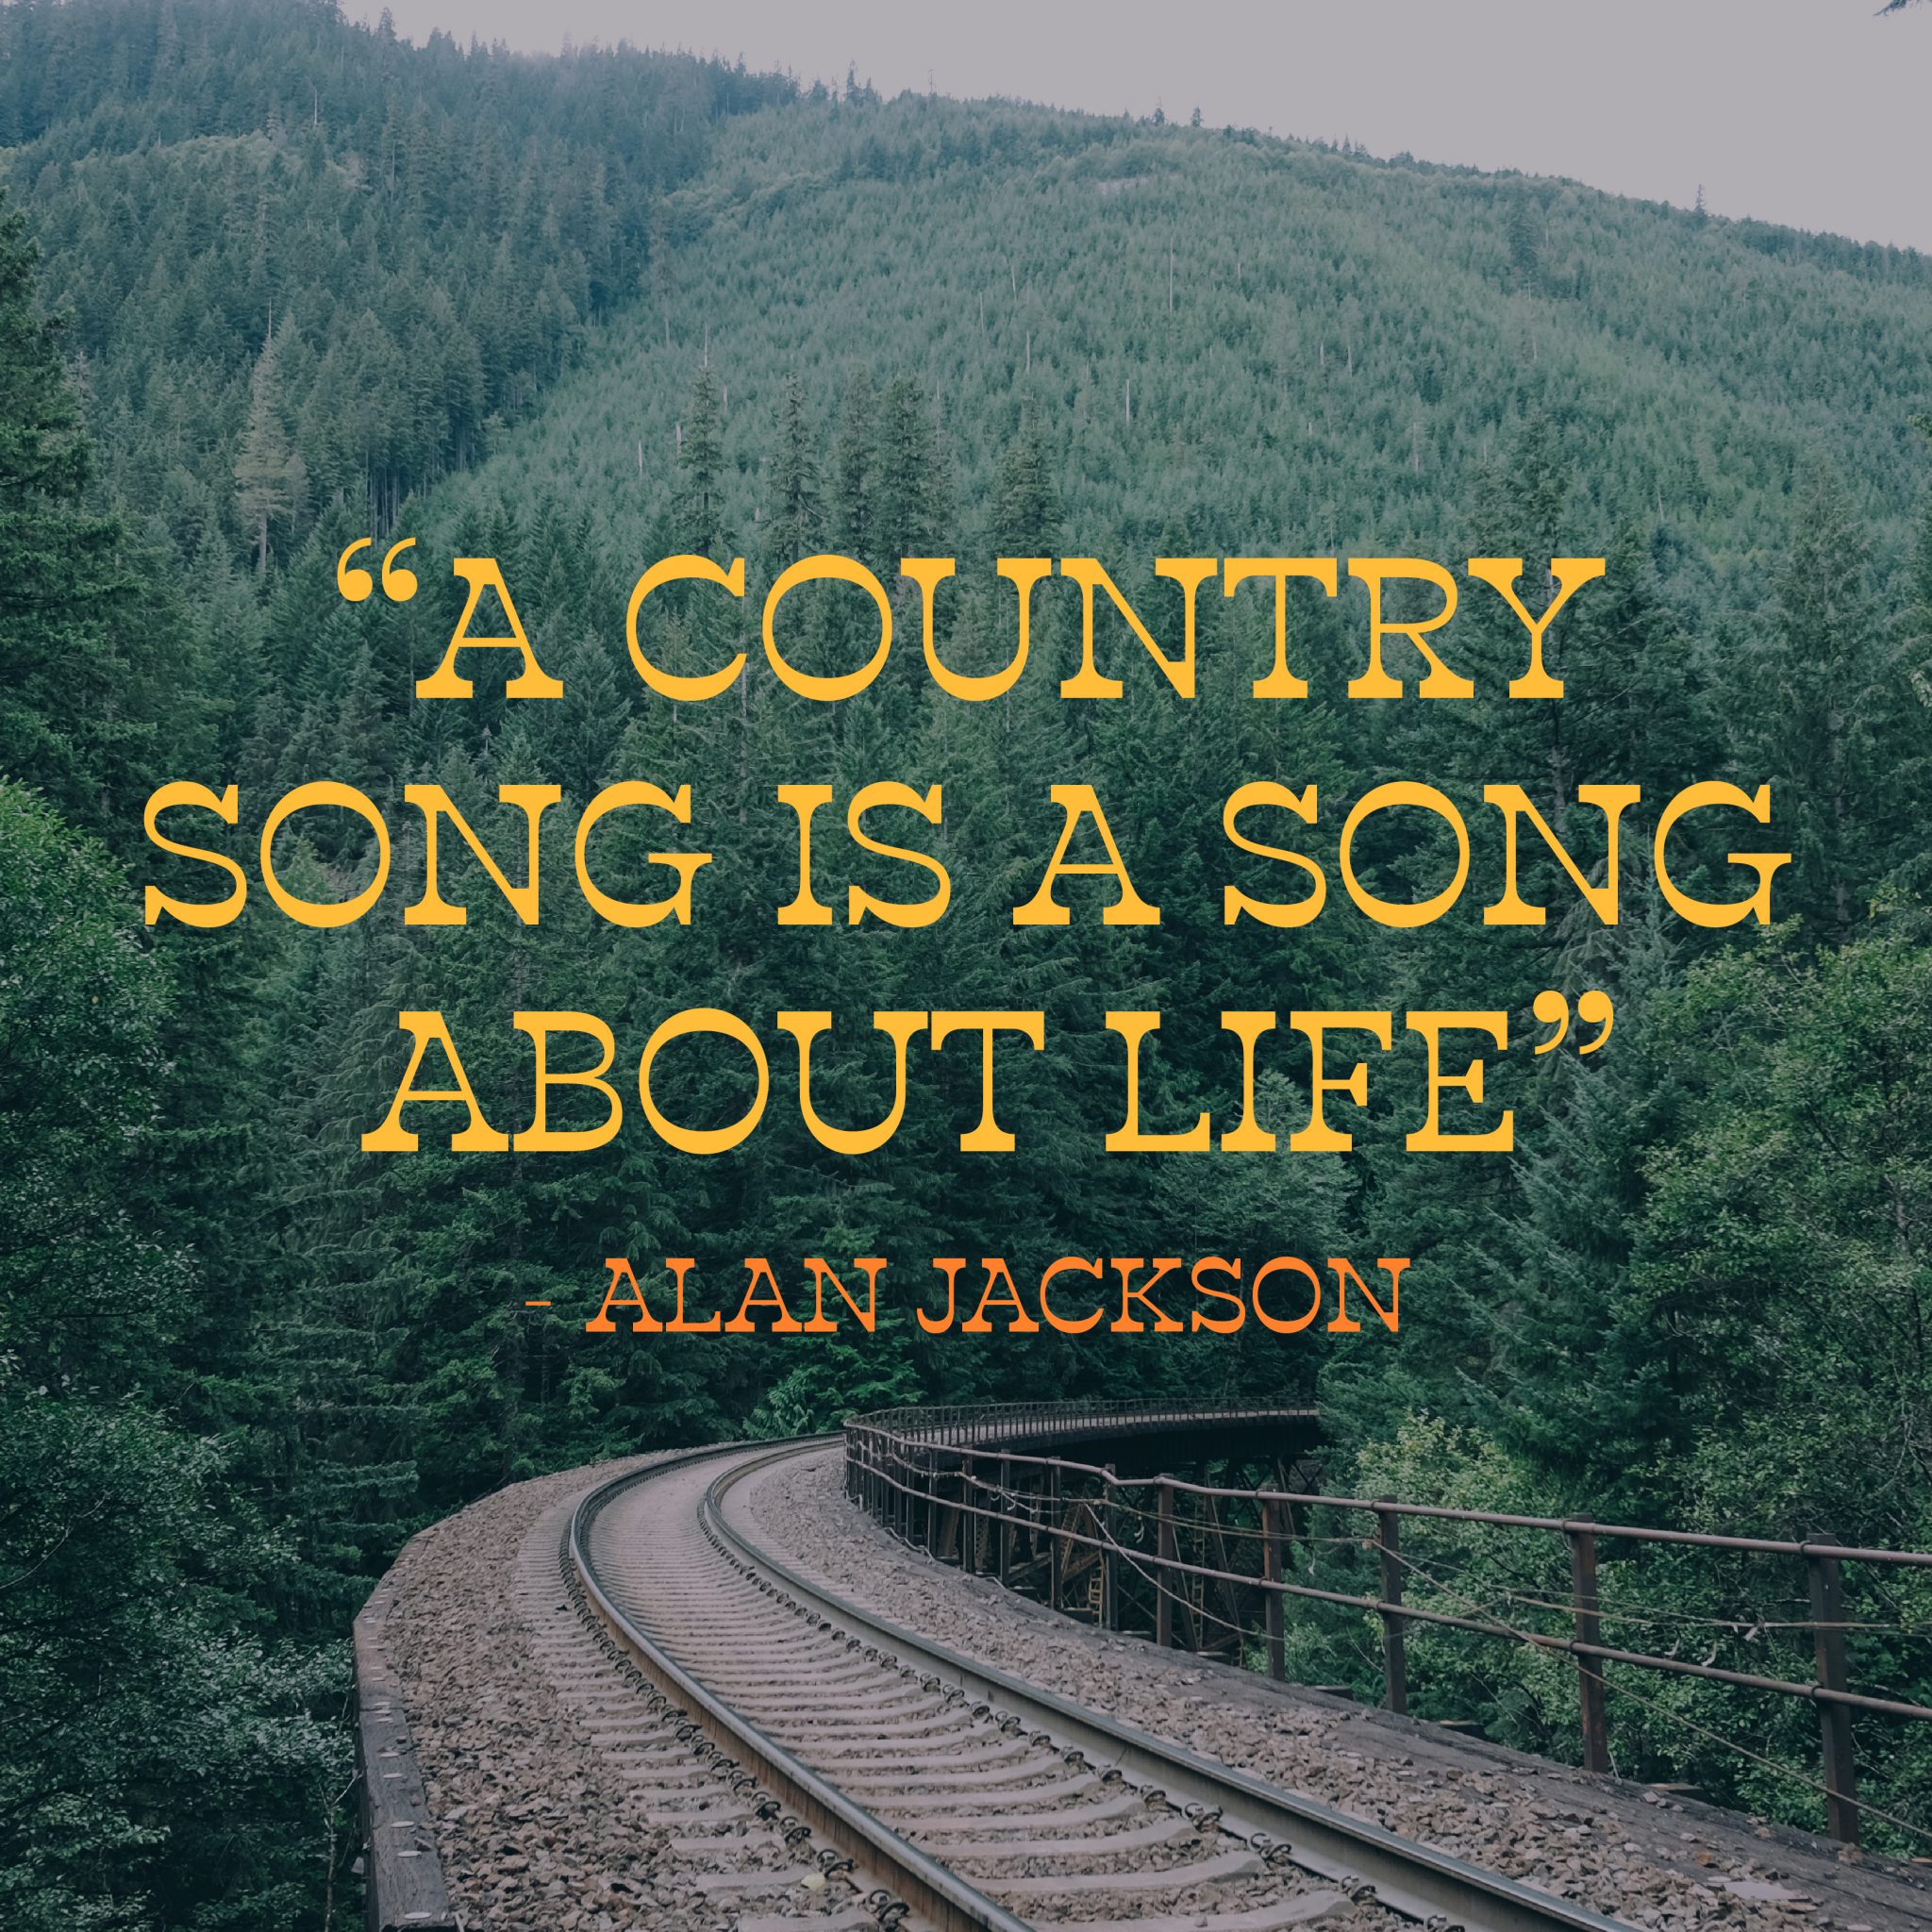 "A country song is a song about life" Alan Jackson